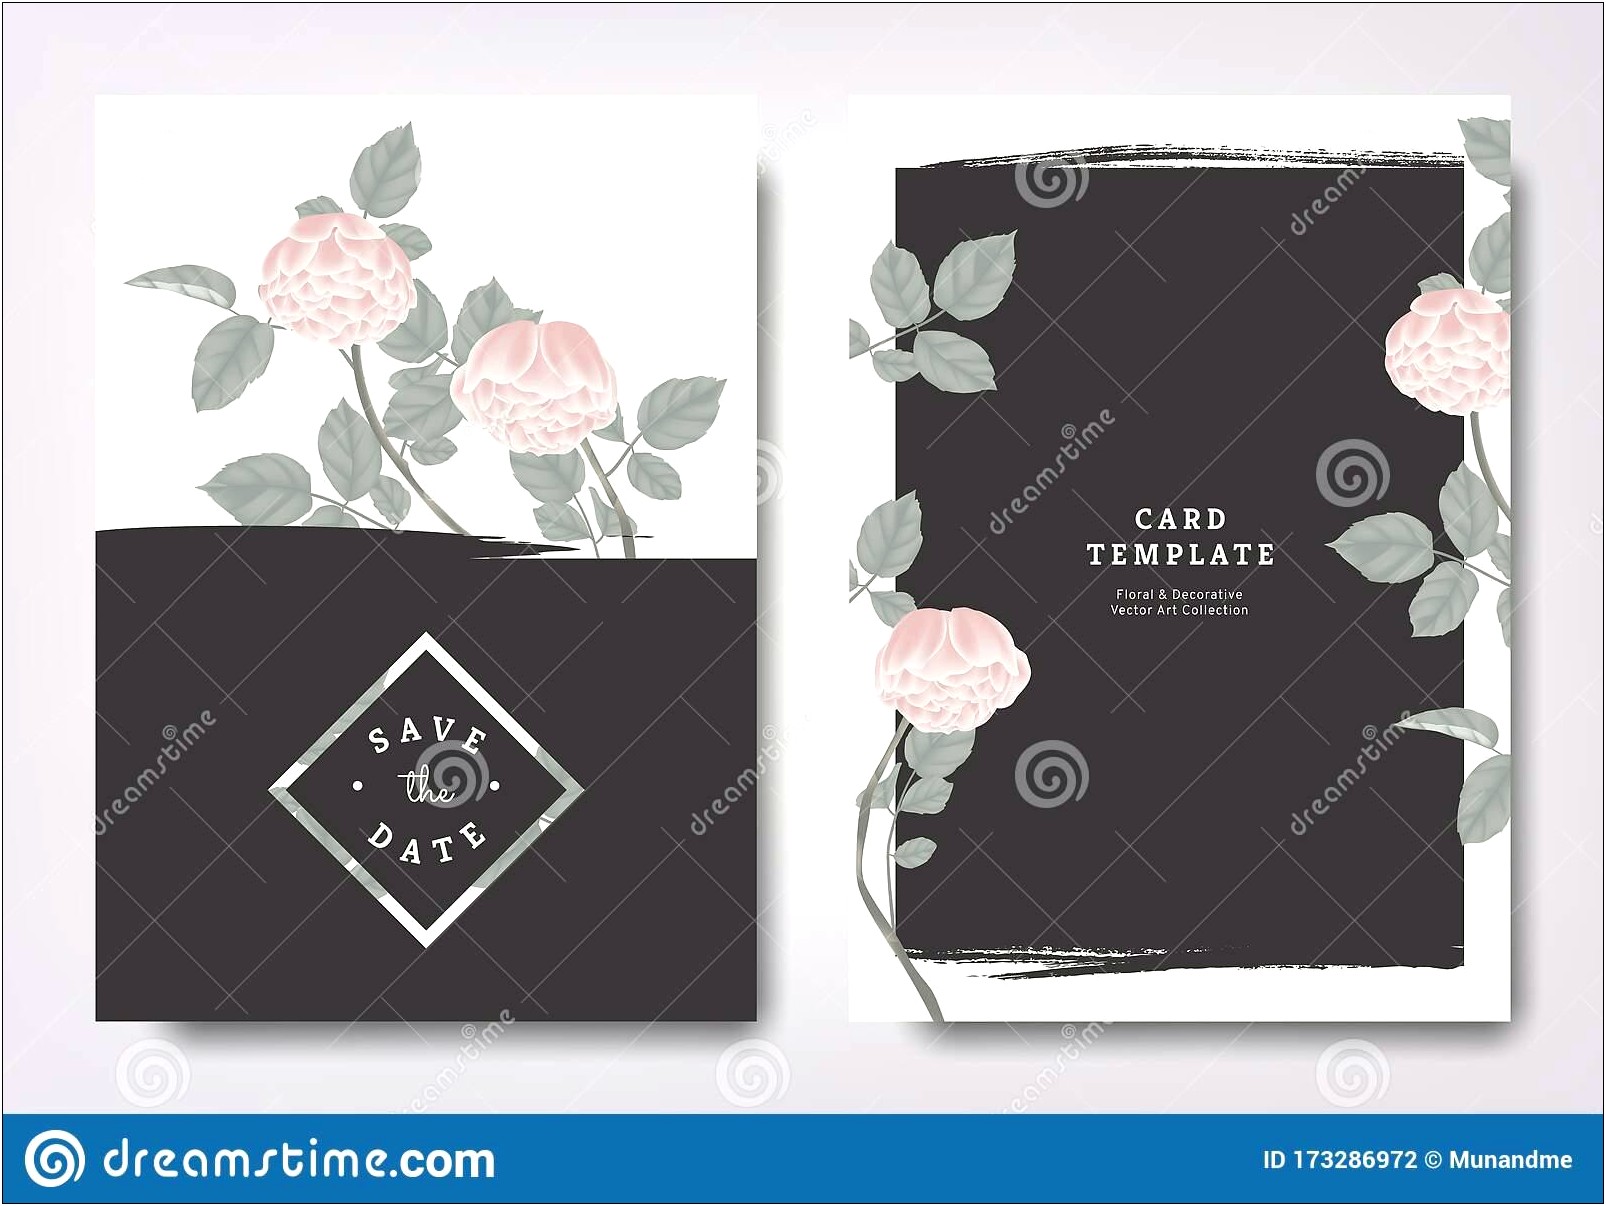 Debut Invitation Card Template Free Download